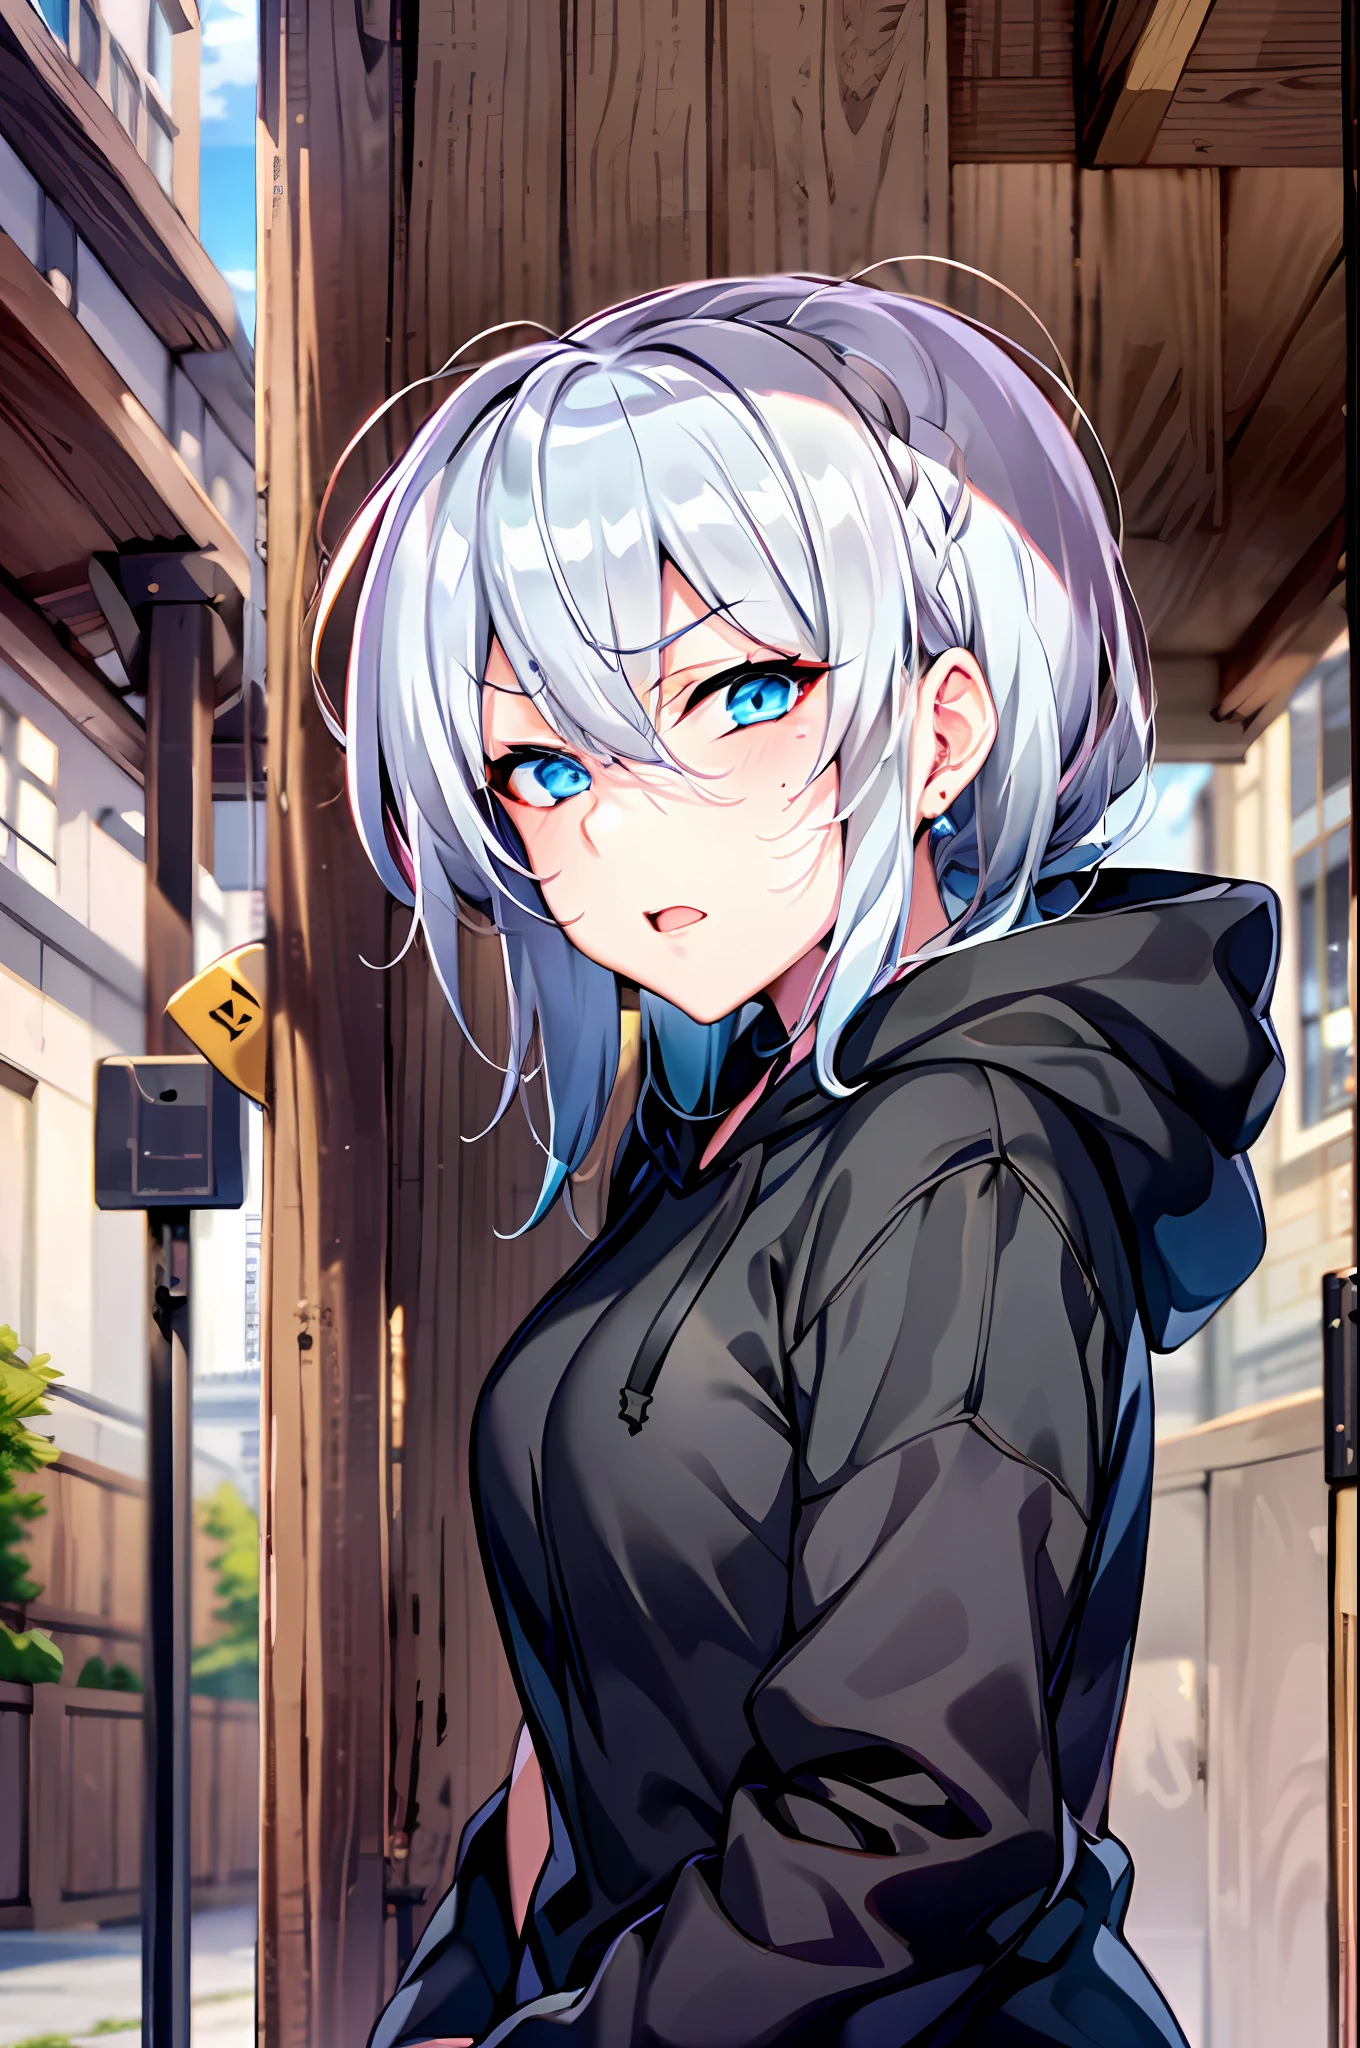 Yukino, Silver hair and  eyes in a black hoodie, anime visual of a cute girl, screenshot from the anime film, & her expression is solemn, ahegao face, in the anime film, in an anime, anime visual of a young woman, she has a cute expressive face, still from anime